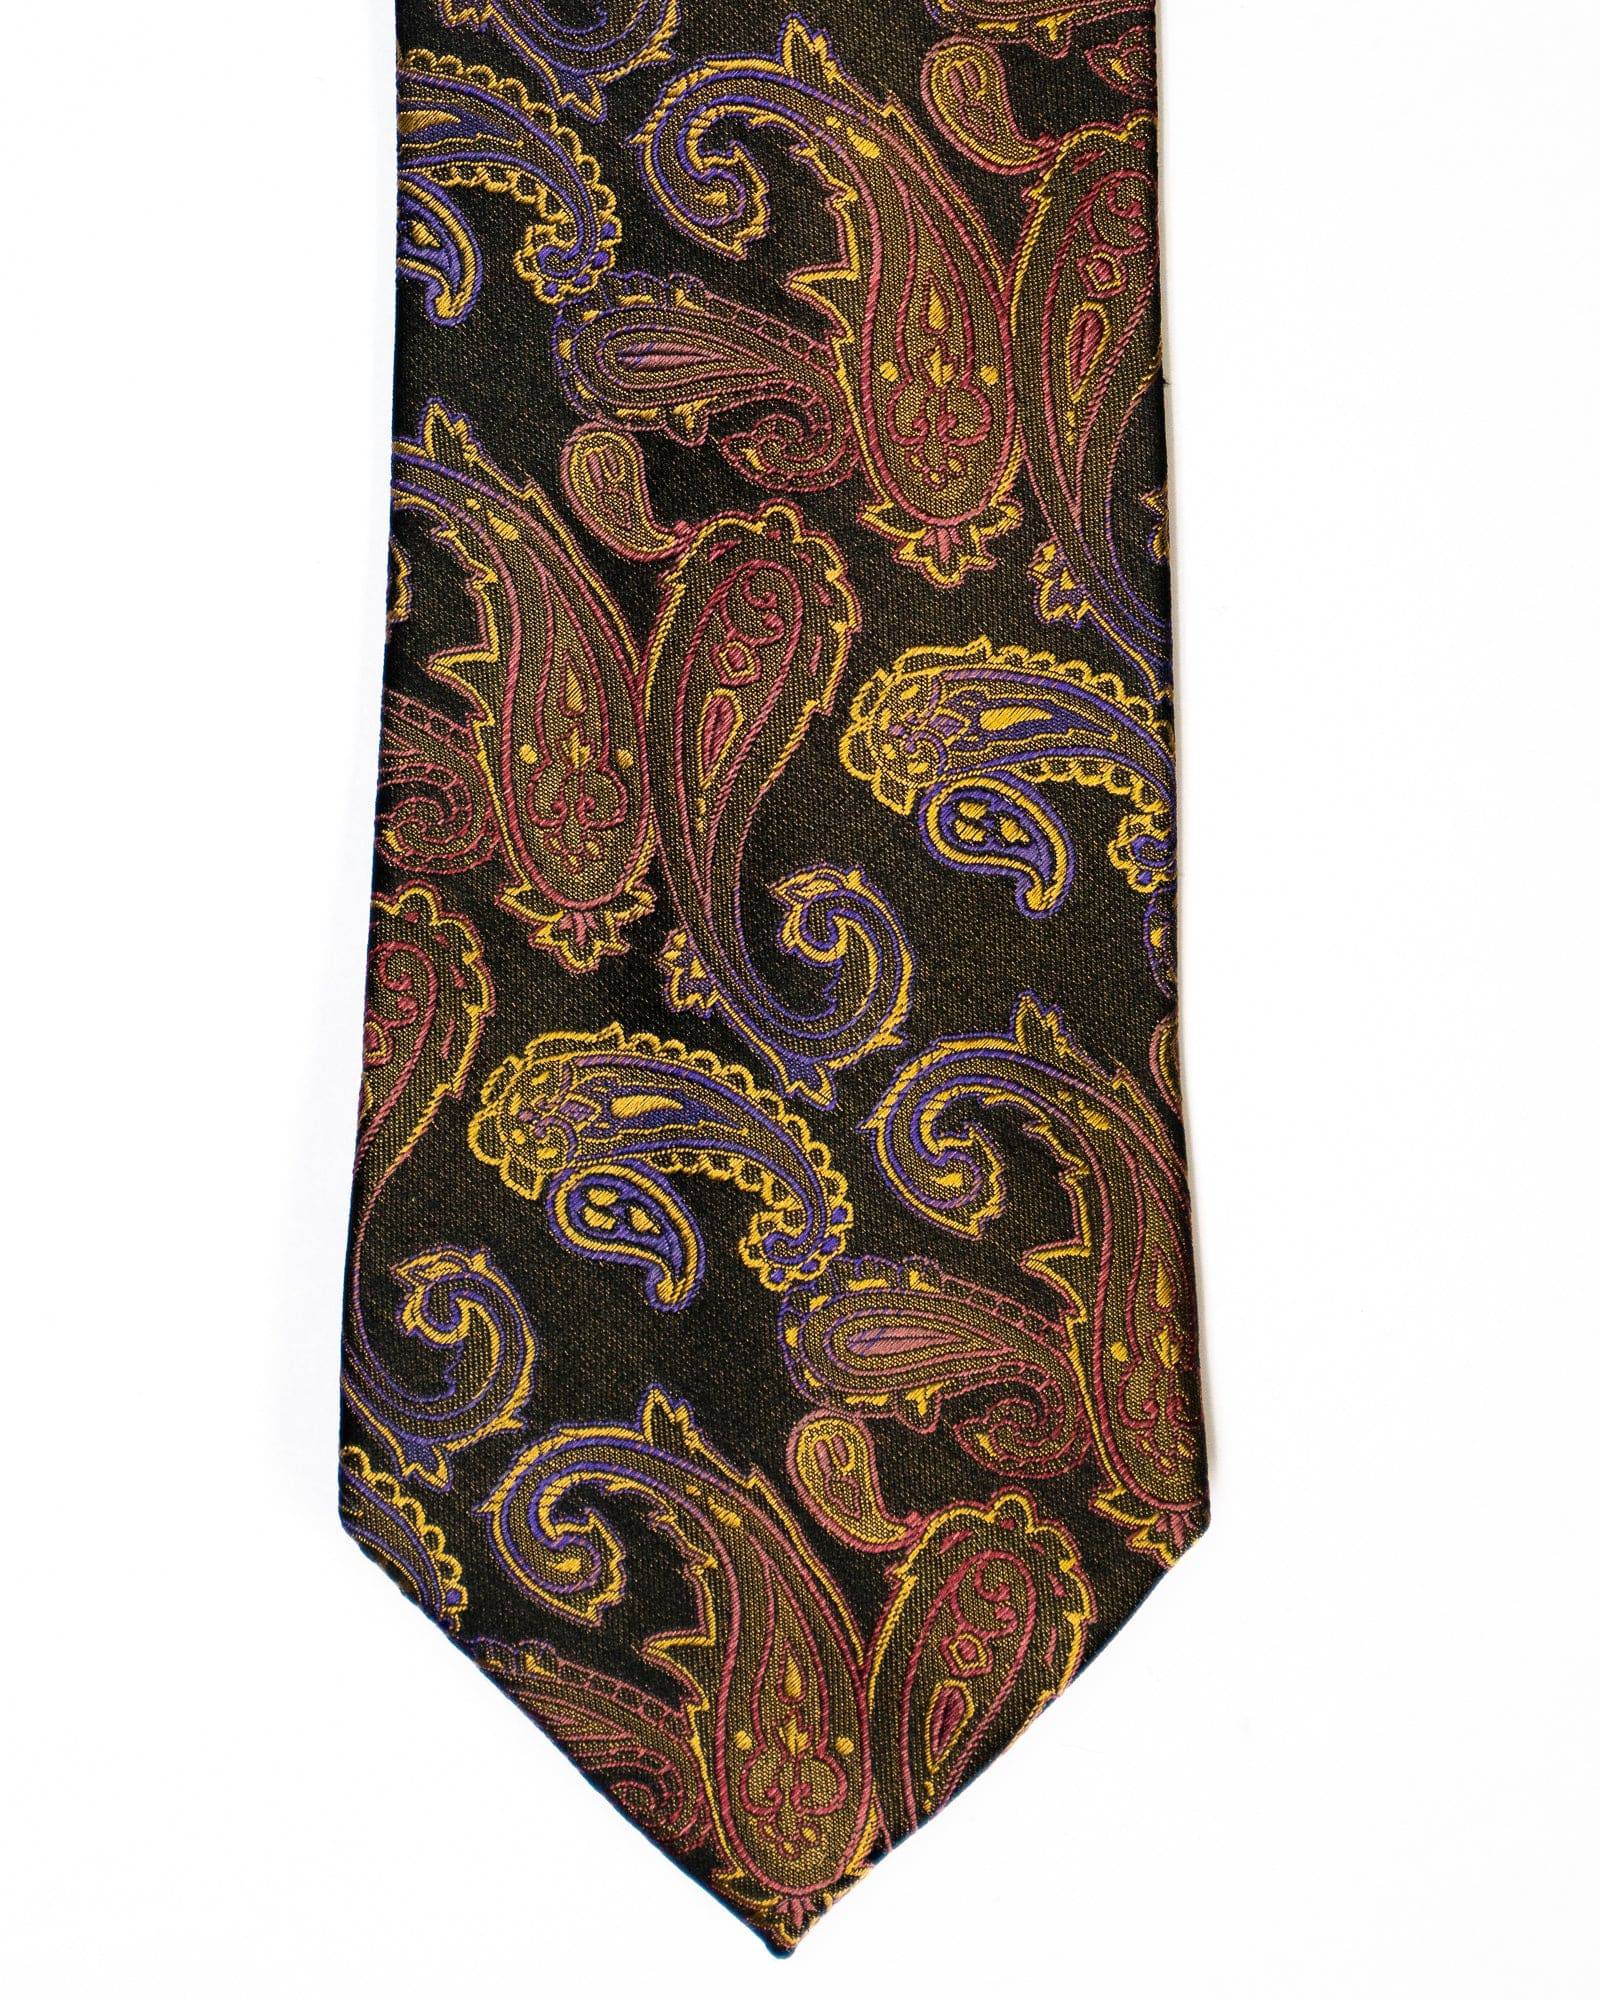 Paisley Silk Tie in Black With Camel - Rainwater's Men's Clothing and Tuxedo Rental